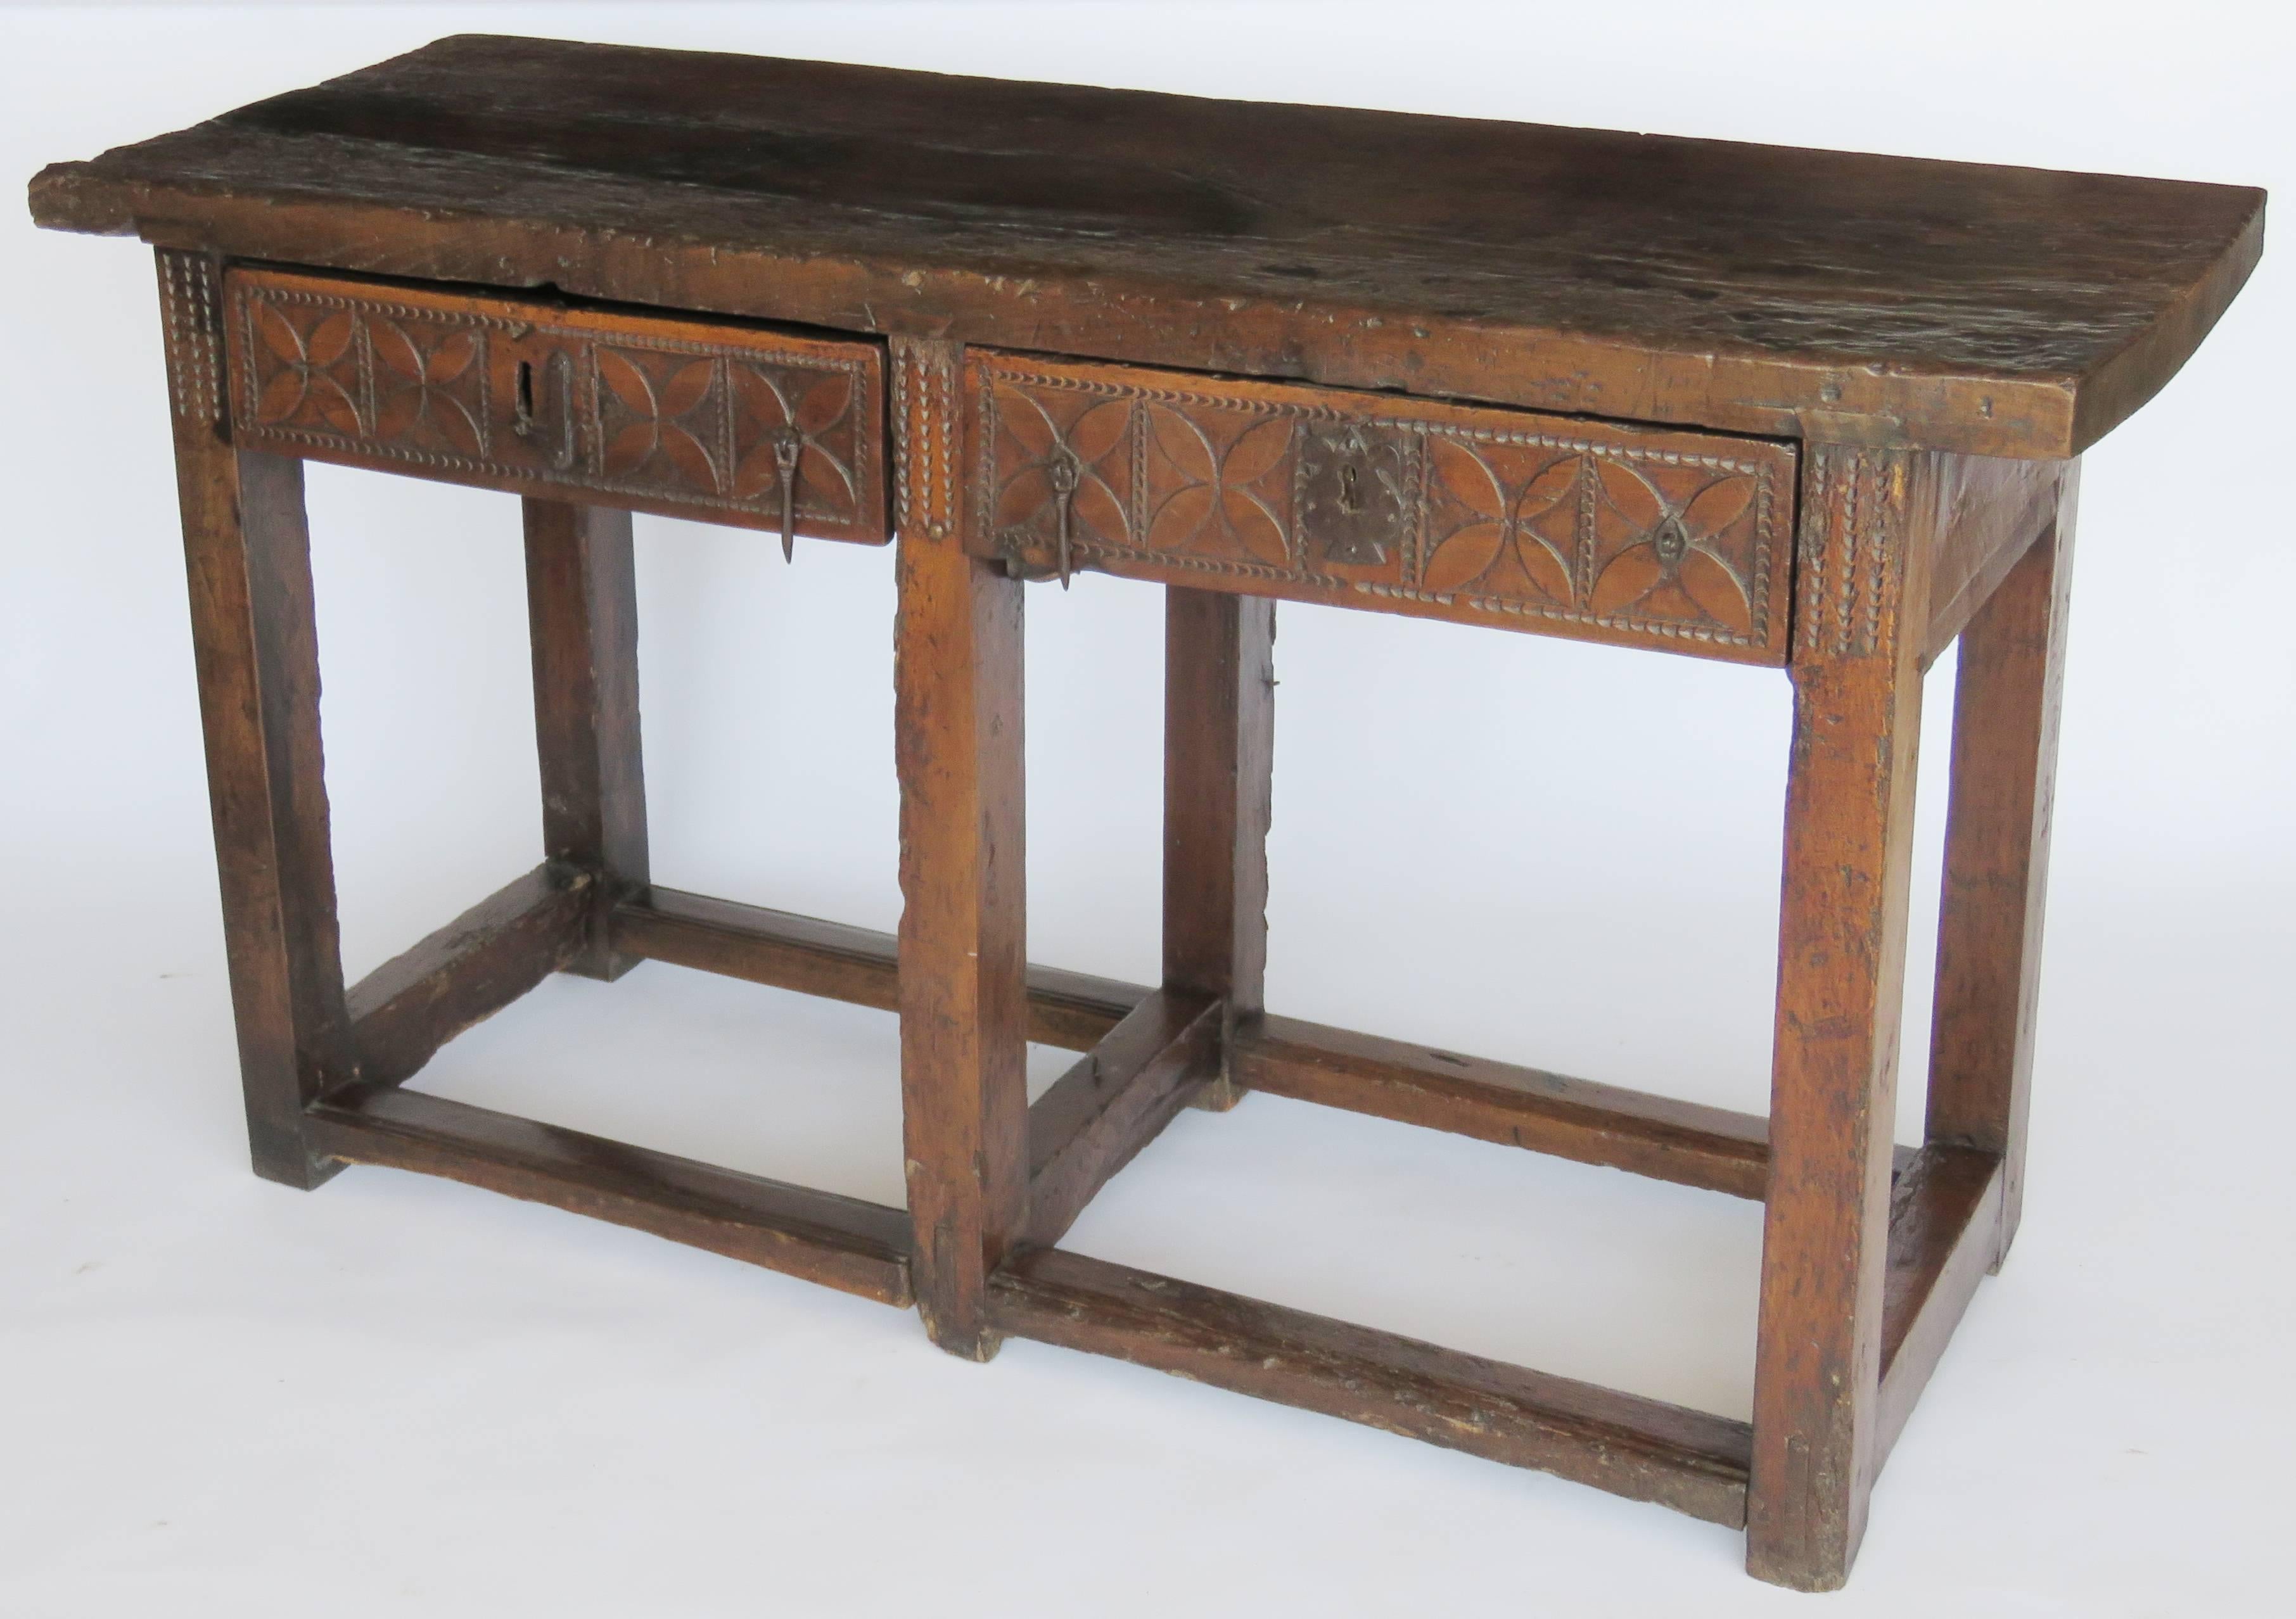 Rectangular top above two drawers with geometric carved panels raised on square form legs joined by perimeter stretcher.